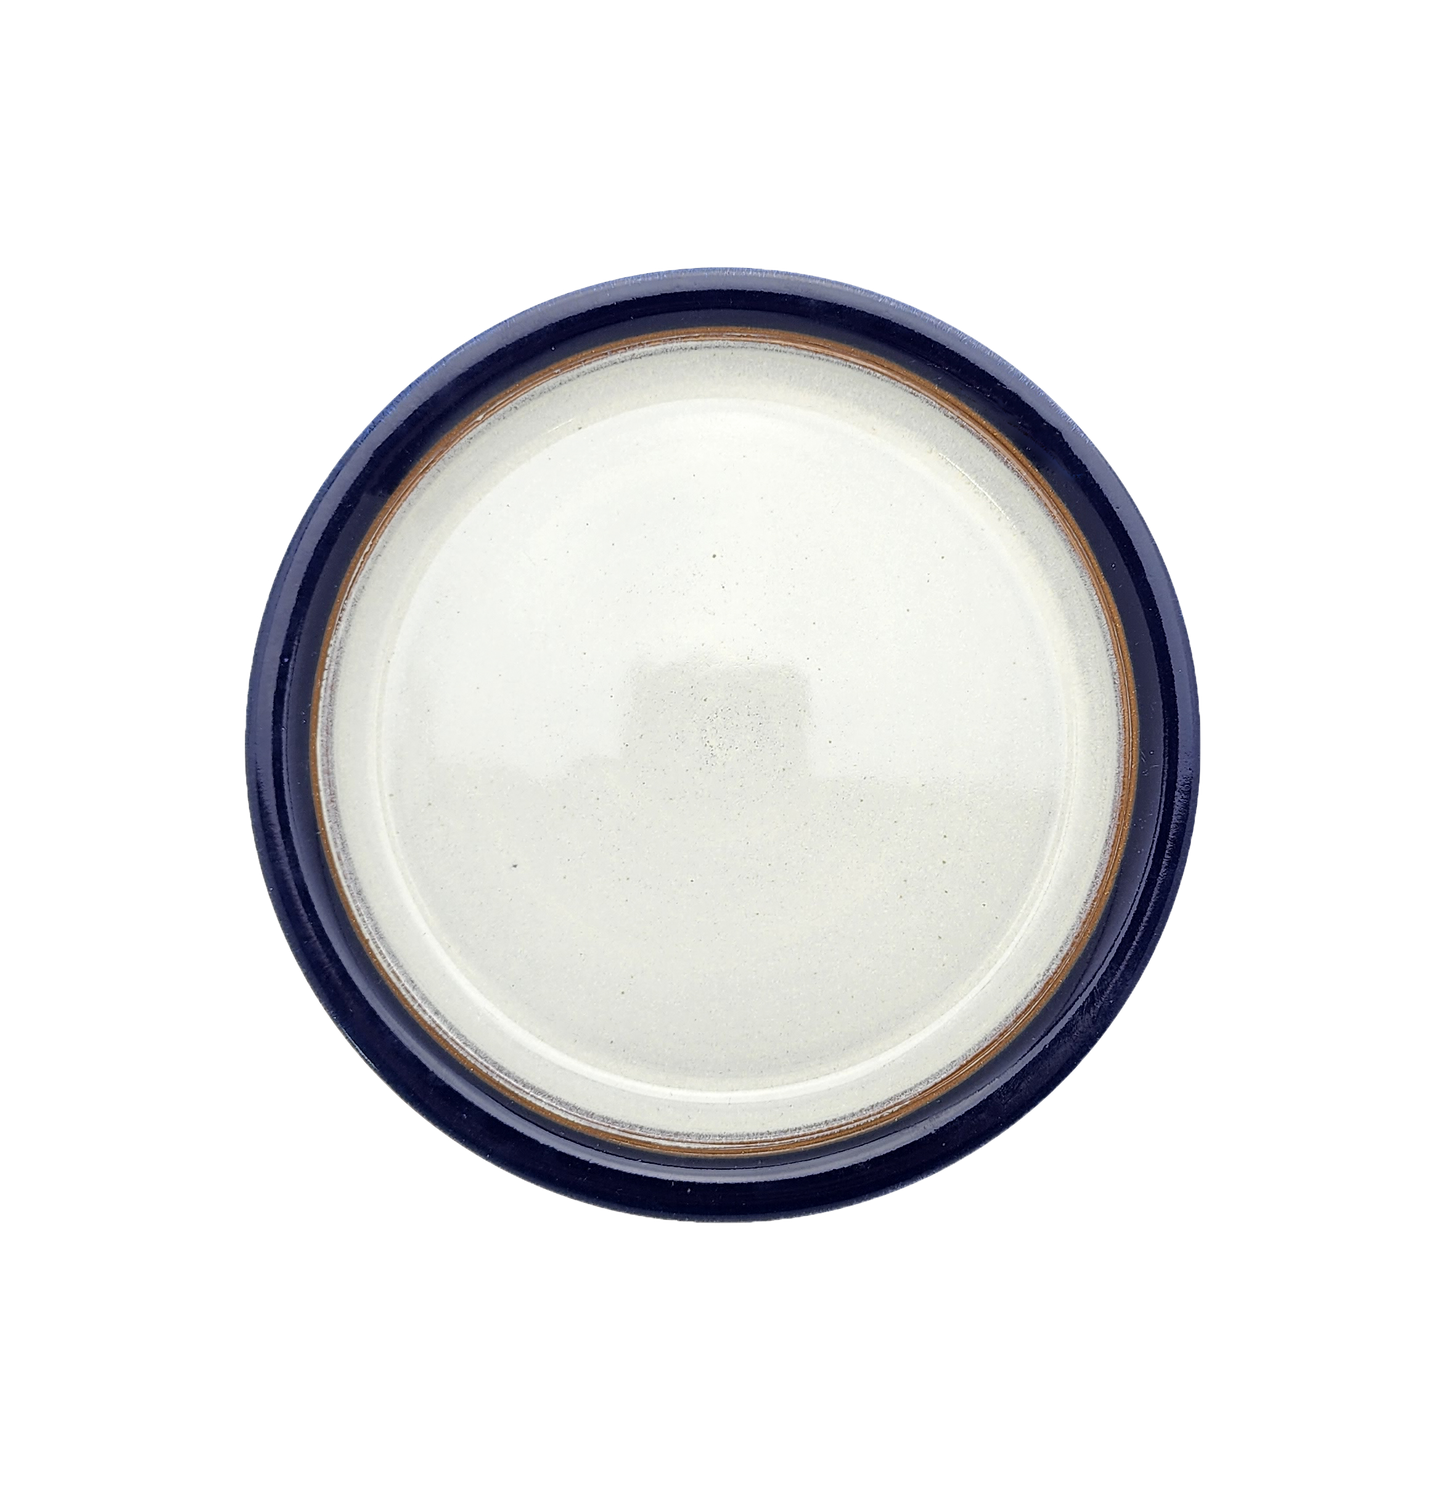 Image Description for Large Dinner Plate (10") in Cobalt: A striking cobalt dinner plate from Clinton Pottery's Handmade Dinnerware Collection. The 10-inch plate features a deep blue glaze, reminiscent of the endless sky on a clear day. Its ample size makes it an ideal choice for serving a delightful dinner with a touch of bold sophistication and elegance.